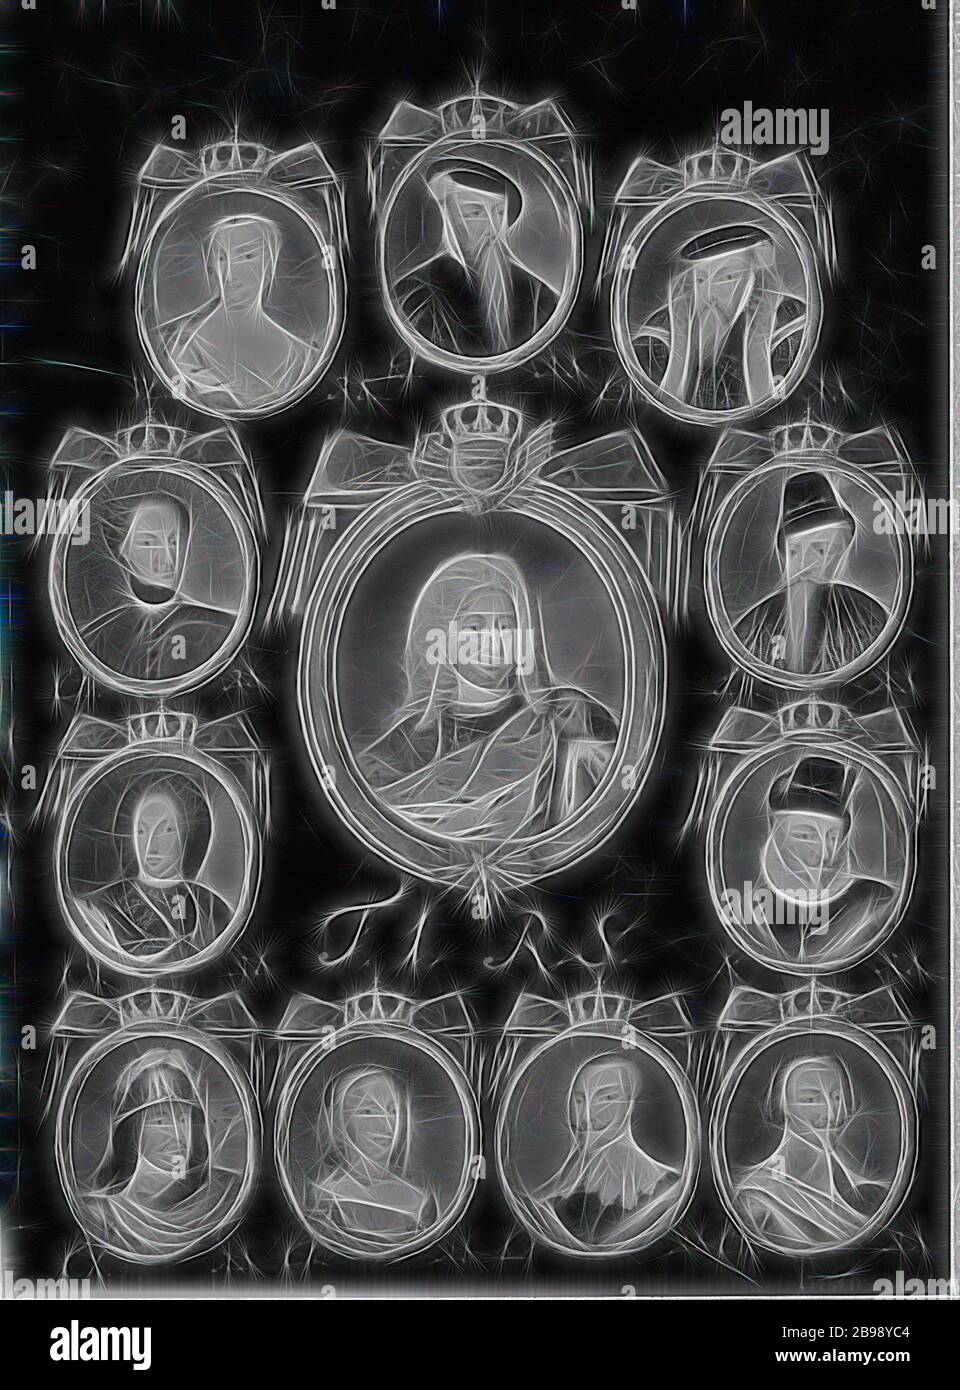 Carl Fredrik Mörck, King Fredrik I, Queen Ulrika Eleonora dy, King Karl XI, King Charles XII, King Karl X Gustav, King Gustav I, King Charles IX, King Johan III, King Sigismund, King Erik XIV, King Gustav II Adolf and, Queen Kristina, Gustav I - Fredrik I, Regentserie with 12 portraits, painting, portrait, Frederick I of Sweden, Gouache on paper and parchment, Height, 31 cm (12.2 inches), Width, 22 cm (8.6 inches, Inscription, UE, RS, , G. I, RS E.XIV, C.XII, RS J.III, RS C. XI, RS F.I, S. RS, C.X, Ch, G.A RS, C.IX, RS Signed, Carl Fredrick Mörck, Reimagined by Gibon, design of warm cheerful g Stock Photo